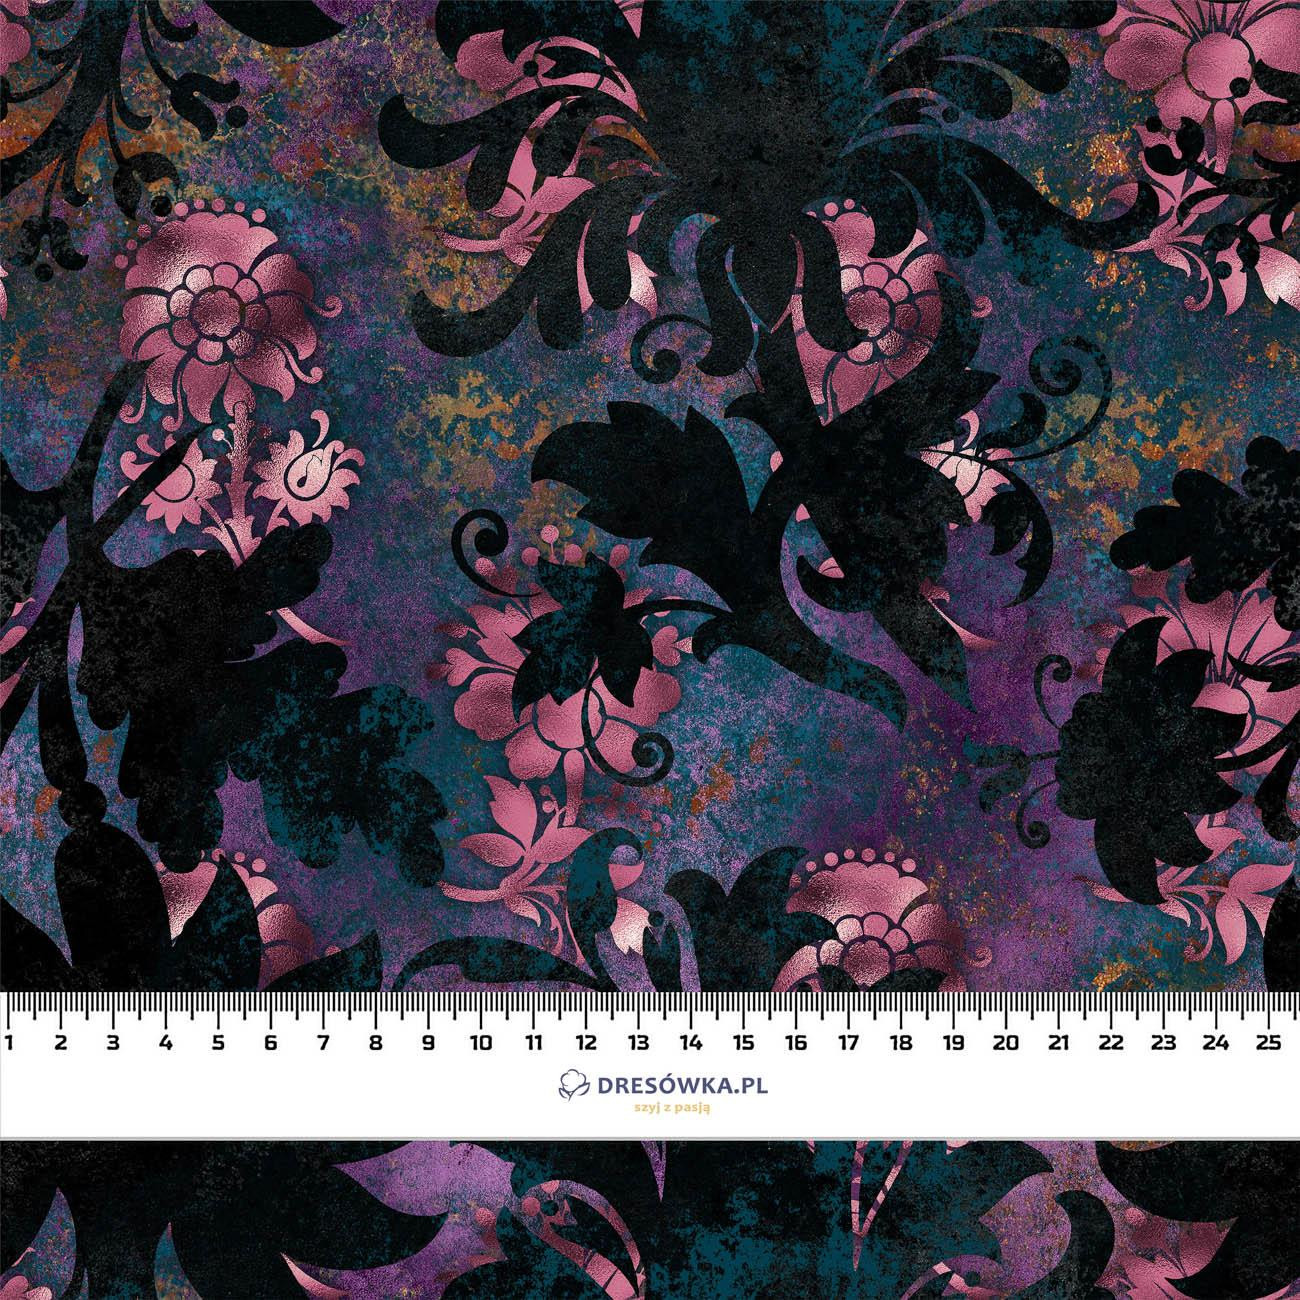 FLORAL  MS. 7 - Waterproof woven fabric